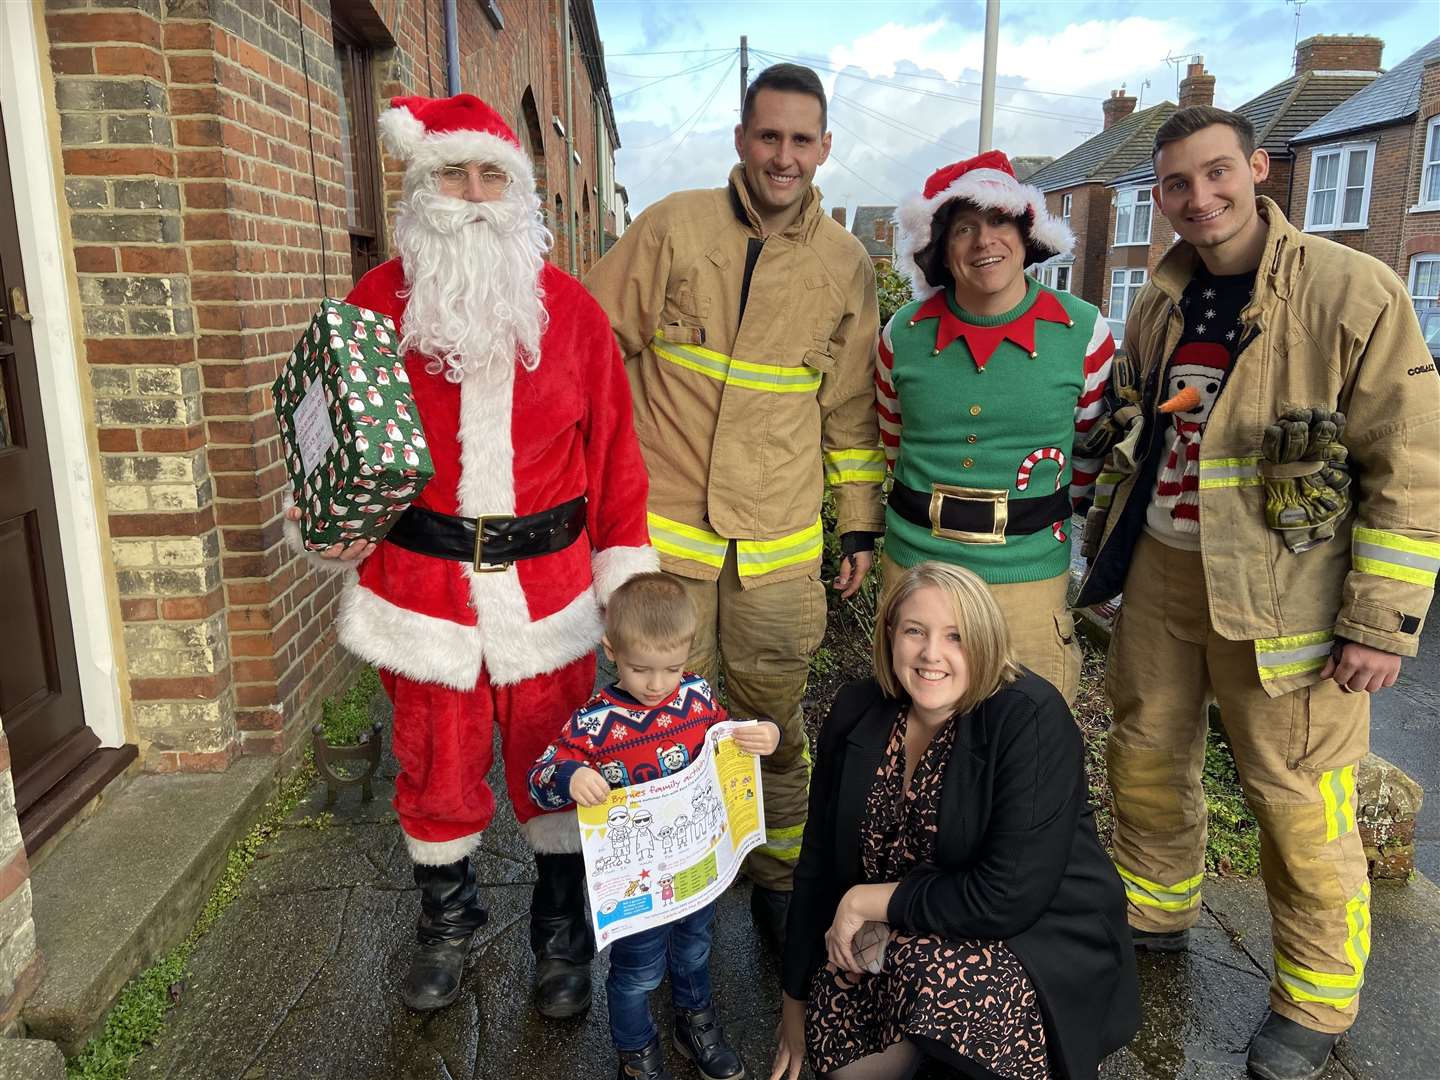 The crew gave fire safety advice and gifts to families across the town